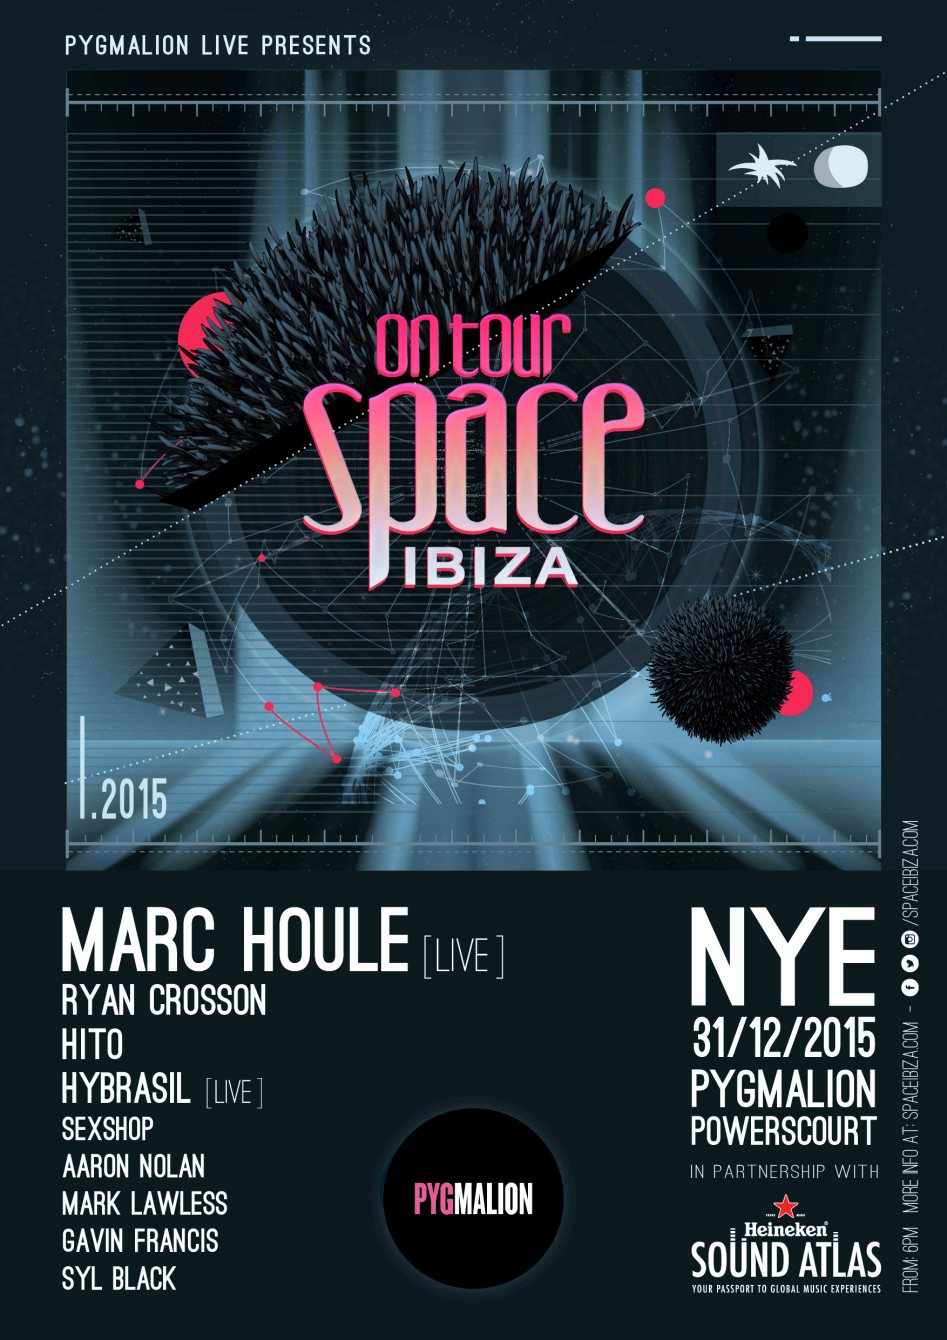 Pygmalion Live: Space Ibiza on Tour with Marc Houle (Live), Ryan Crosson, Hito, Hybrasil (Live) - Flyer back